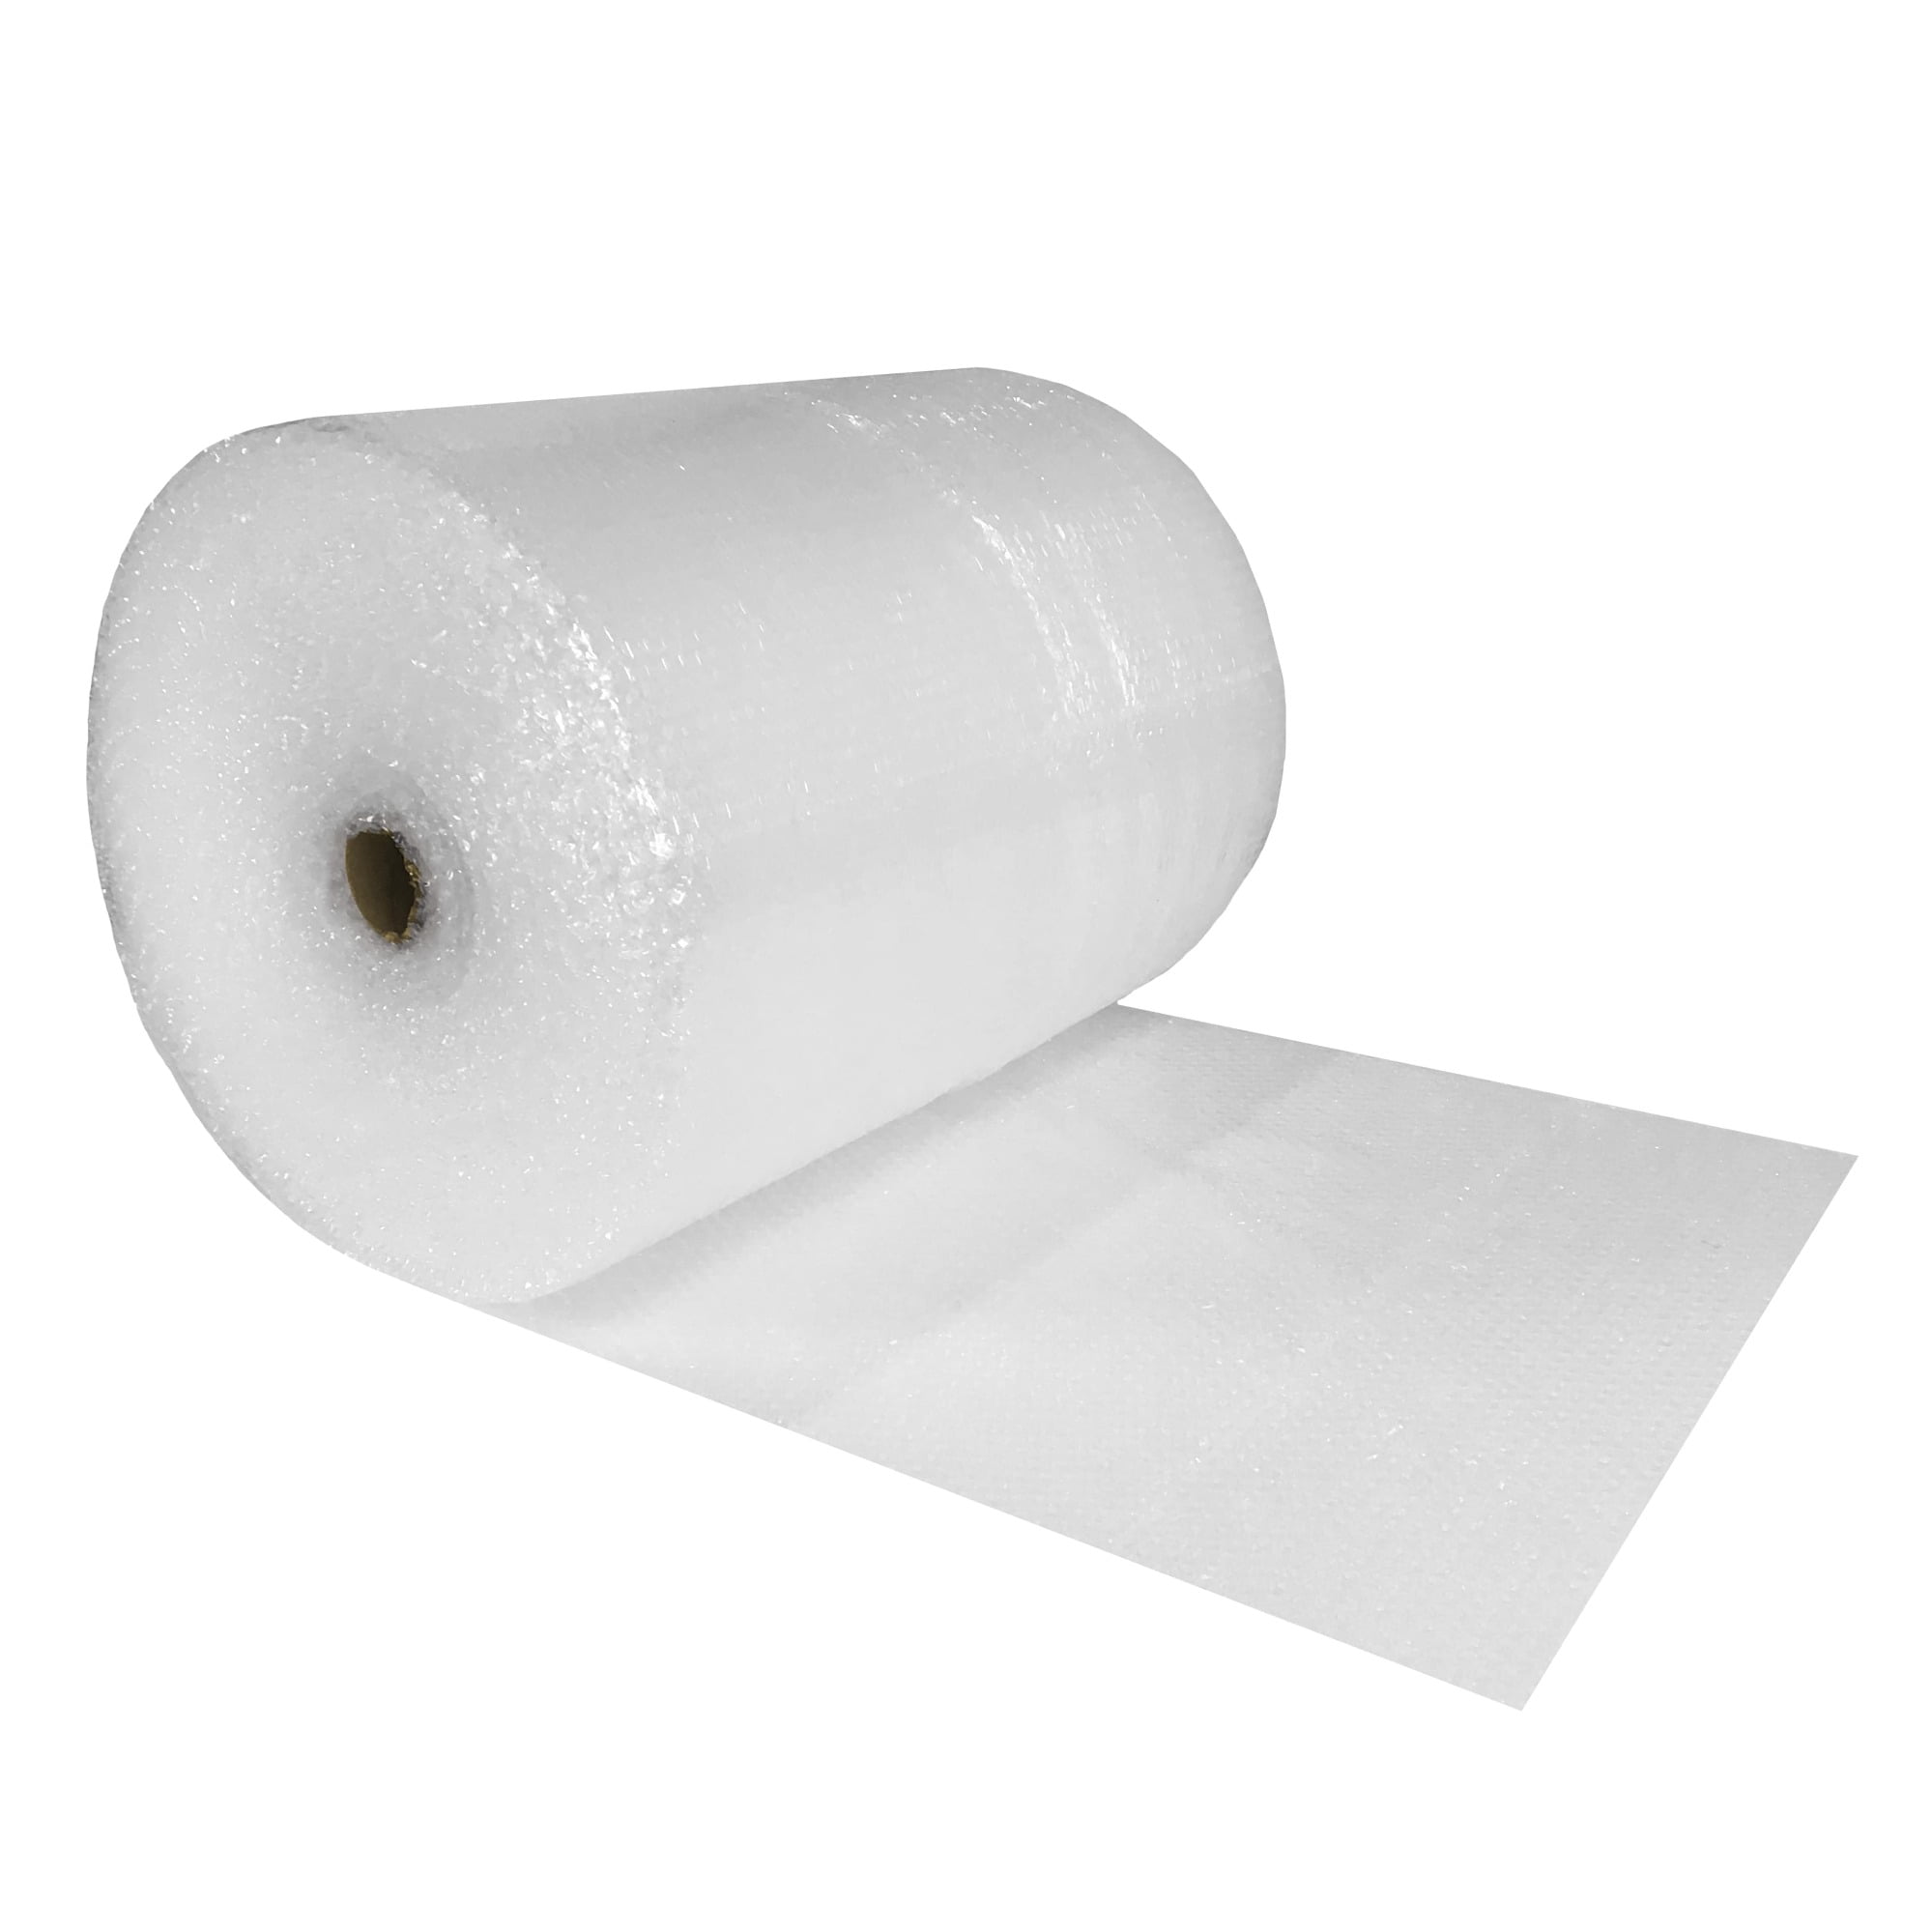 Wrap 12" Width Roll Perforated 350 ft 12BS350 PolycyberUSA 3/16" Small bubble 